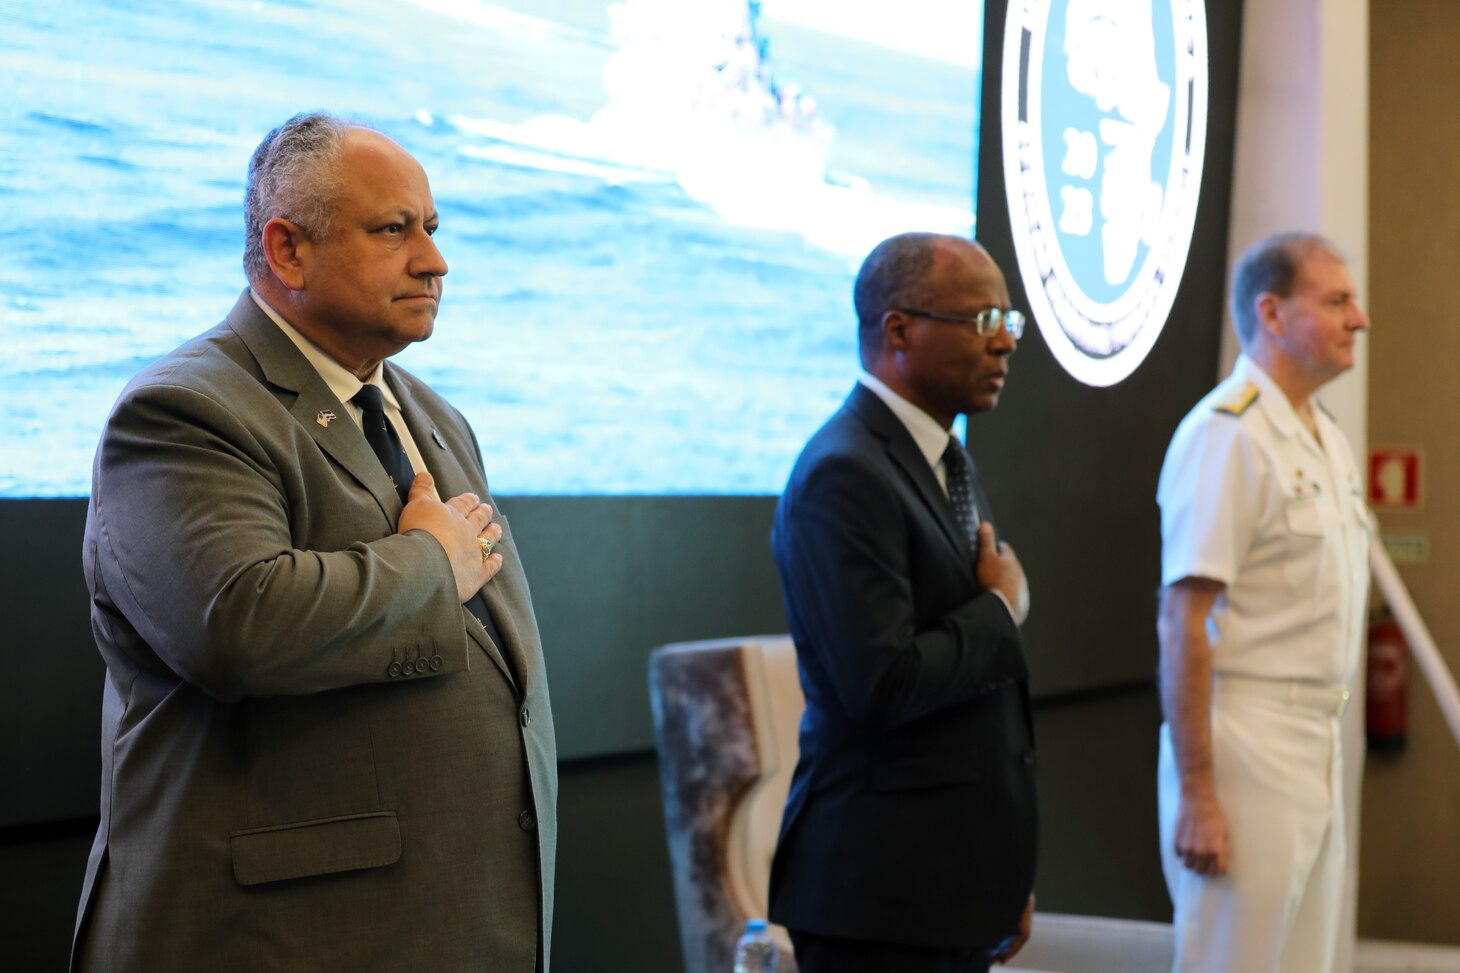 (March 20, 2023) Secretary of the Navy Carlos Del Toro (left), Cabo Verde Prime Minister Ulisses Correa e Silva (center), and U.S. Navy Adm. Stuart B. Munsch, Commander of U.S. Naval Forces Europe-Africa (NAVEUR-NAVAF), stand for the national anthem of the Republic of Cabo Verde during the opening ceremony of the African Maritime Forces Summit (AMFS), Mar. 20 2023. Hosted by NAVEUR-NAVAF, the AMFS is a strategic-level forum that brings African maritime and naval infantry leaders together with their international partners to address transnational maritime security challenges within African waters including the Atlantic Ocean, Indian Ocean, and Mediterranean Sea.